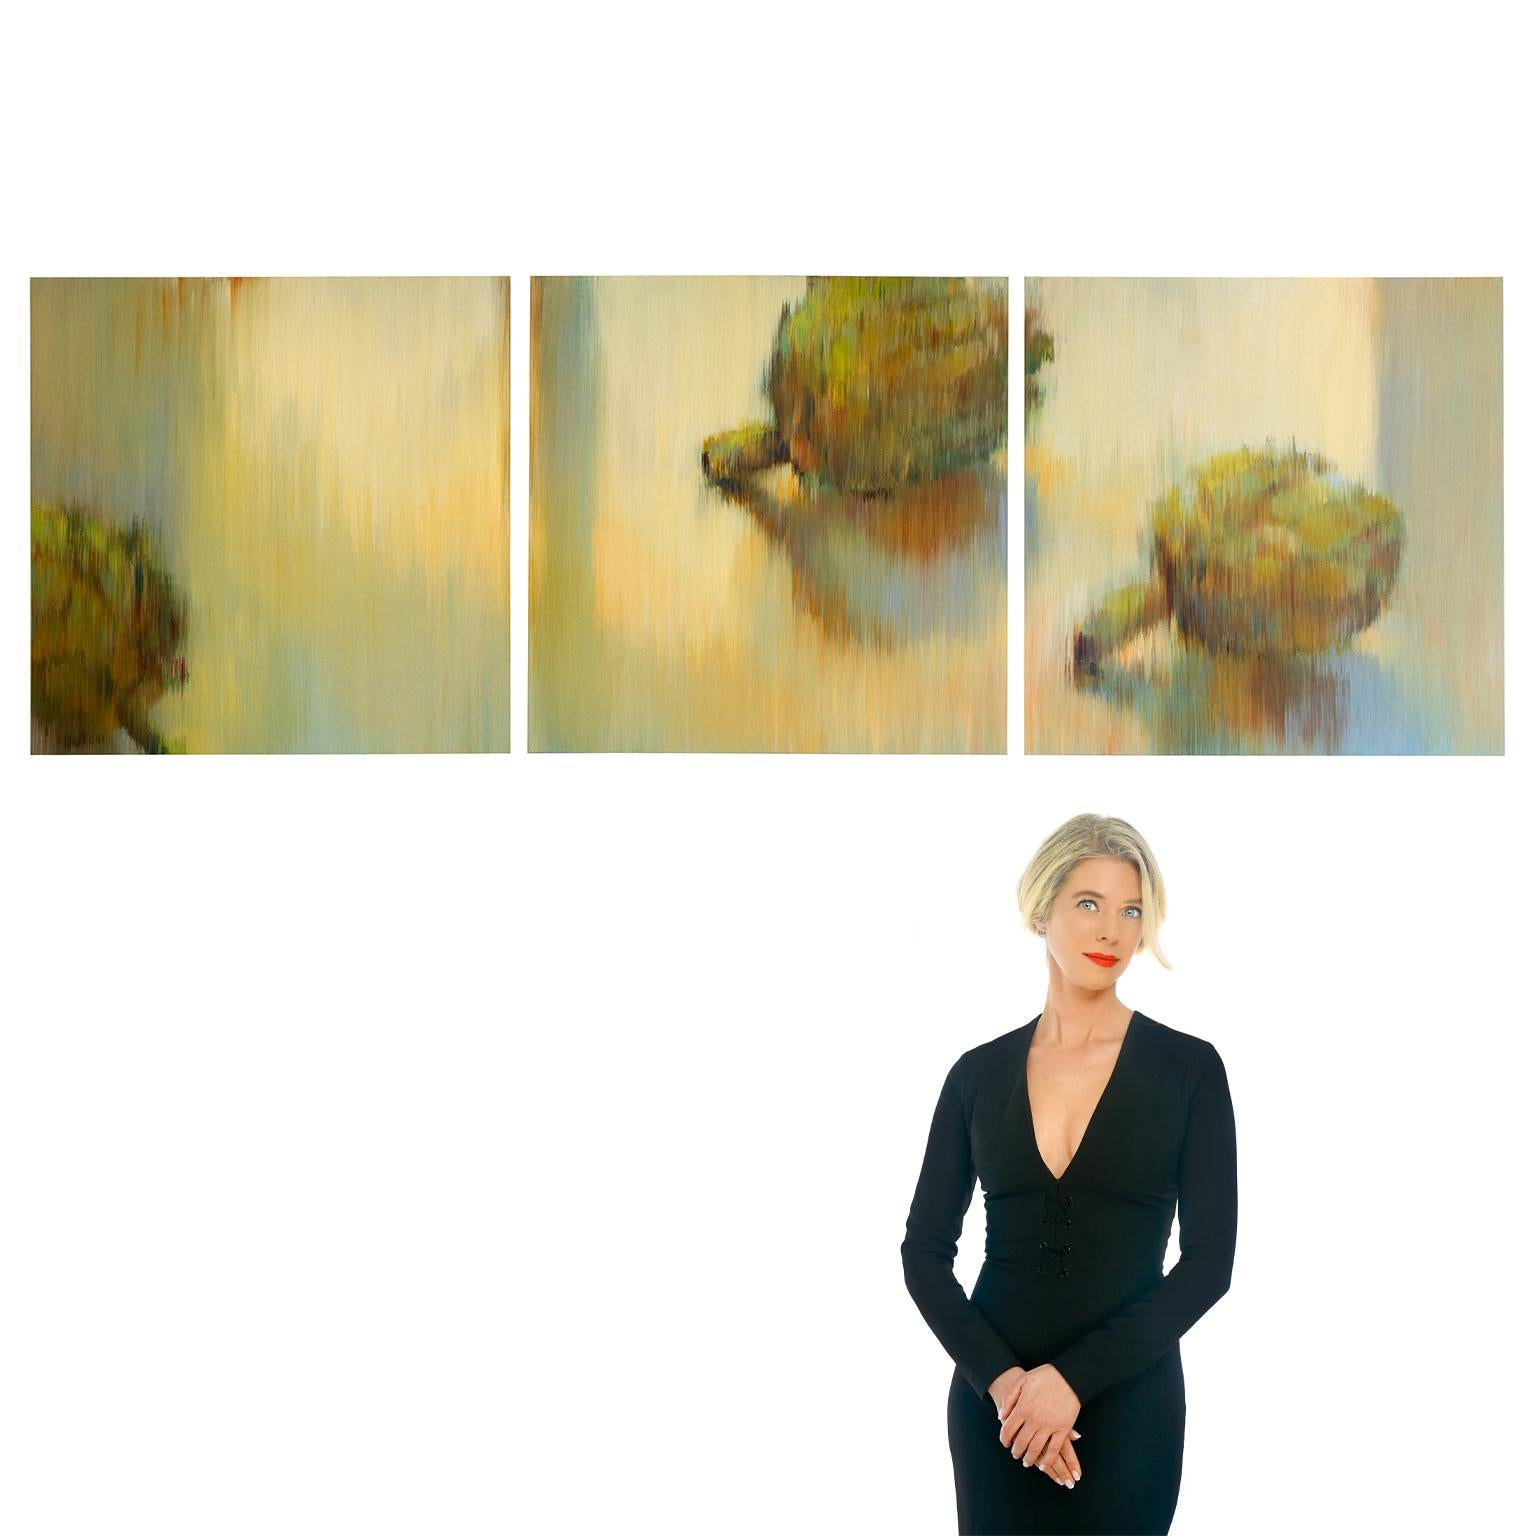 Circa 2008, Acrylic on wood panel by Jill Hackney (b1968), Baton Rouge, LA. Titled Artichokes and part of her Still Life Paintings collection, this triptych or grouping of 3 paintings, forms one work of art. From the artist ...seeing everything as a